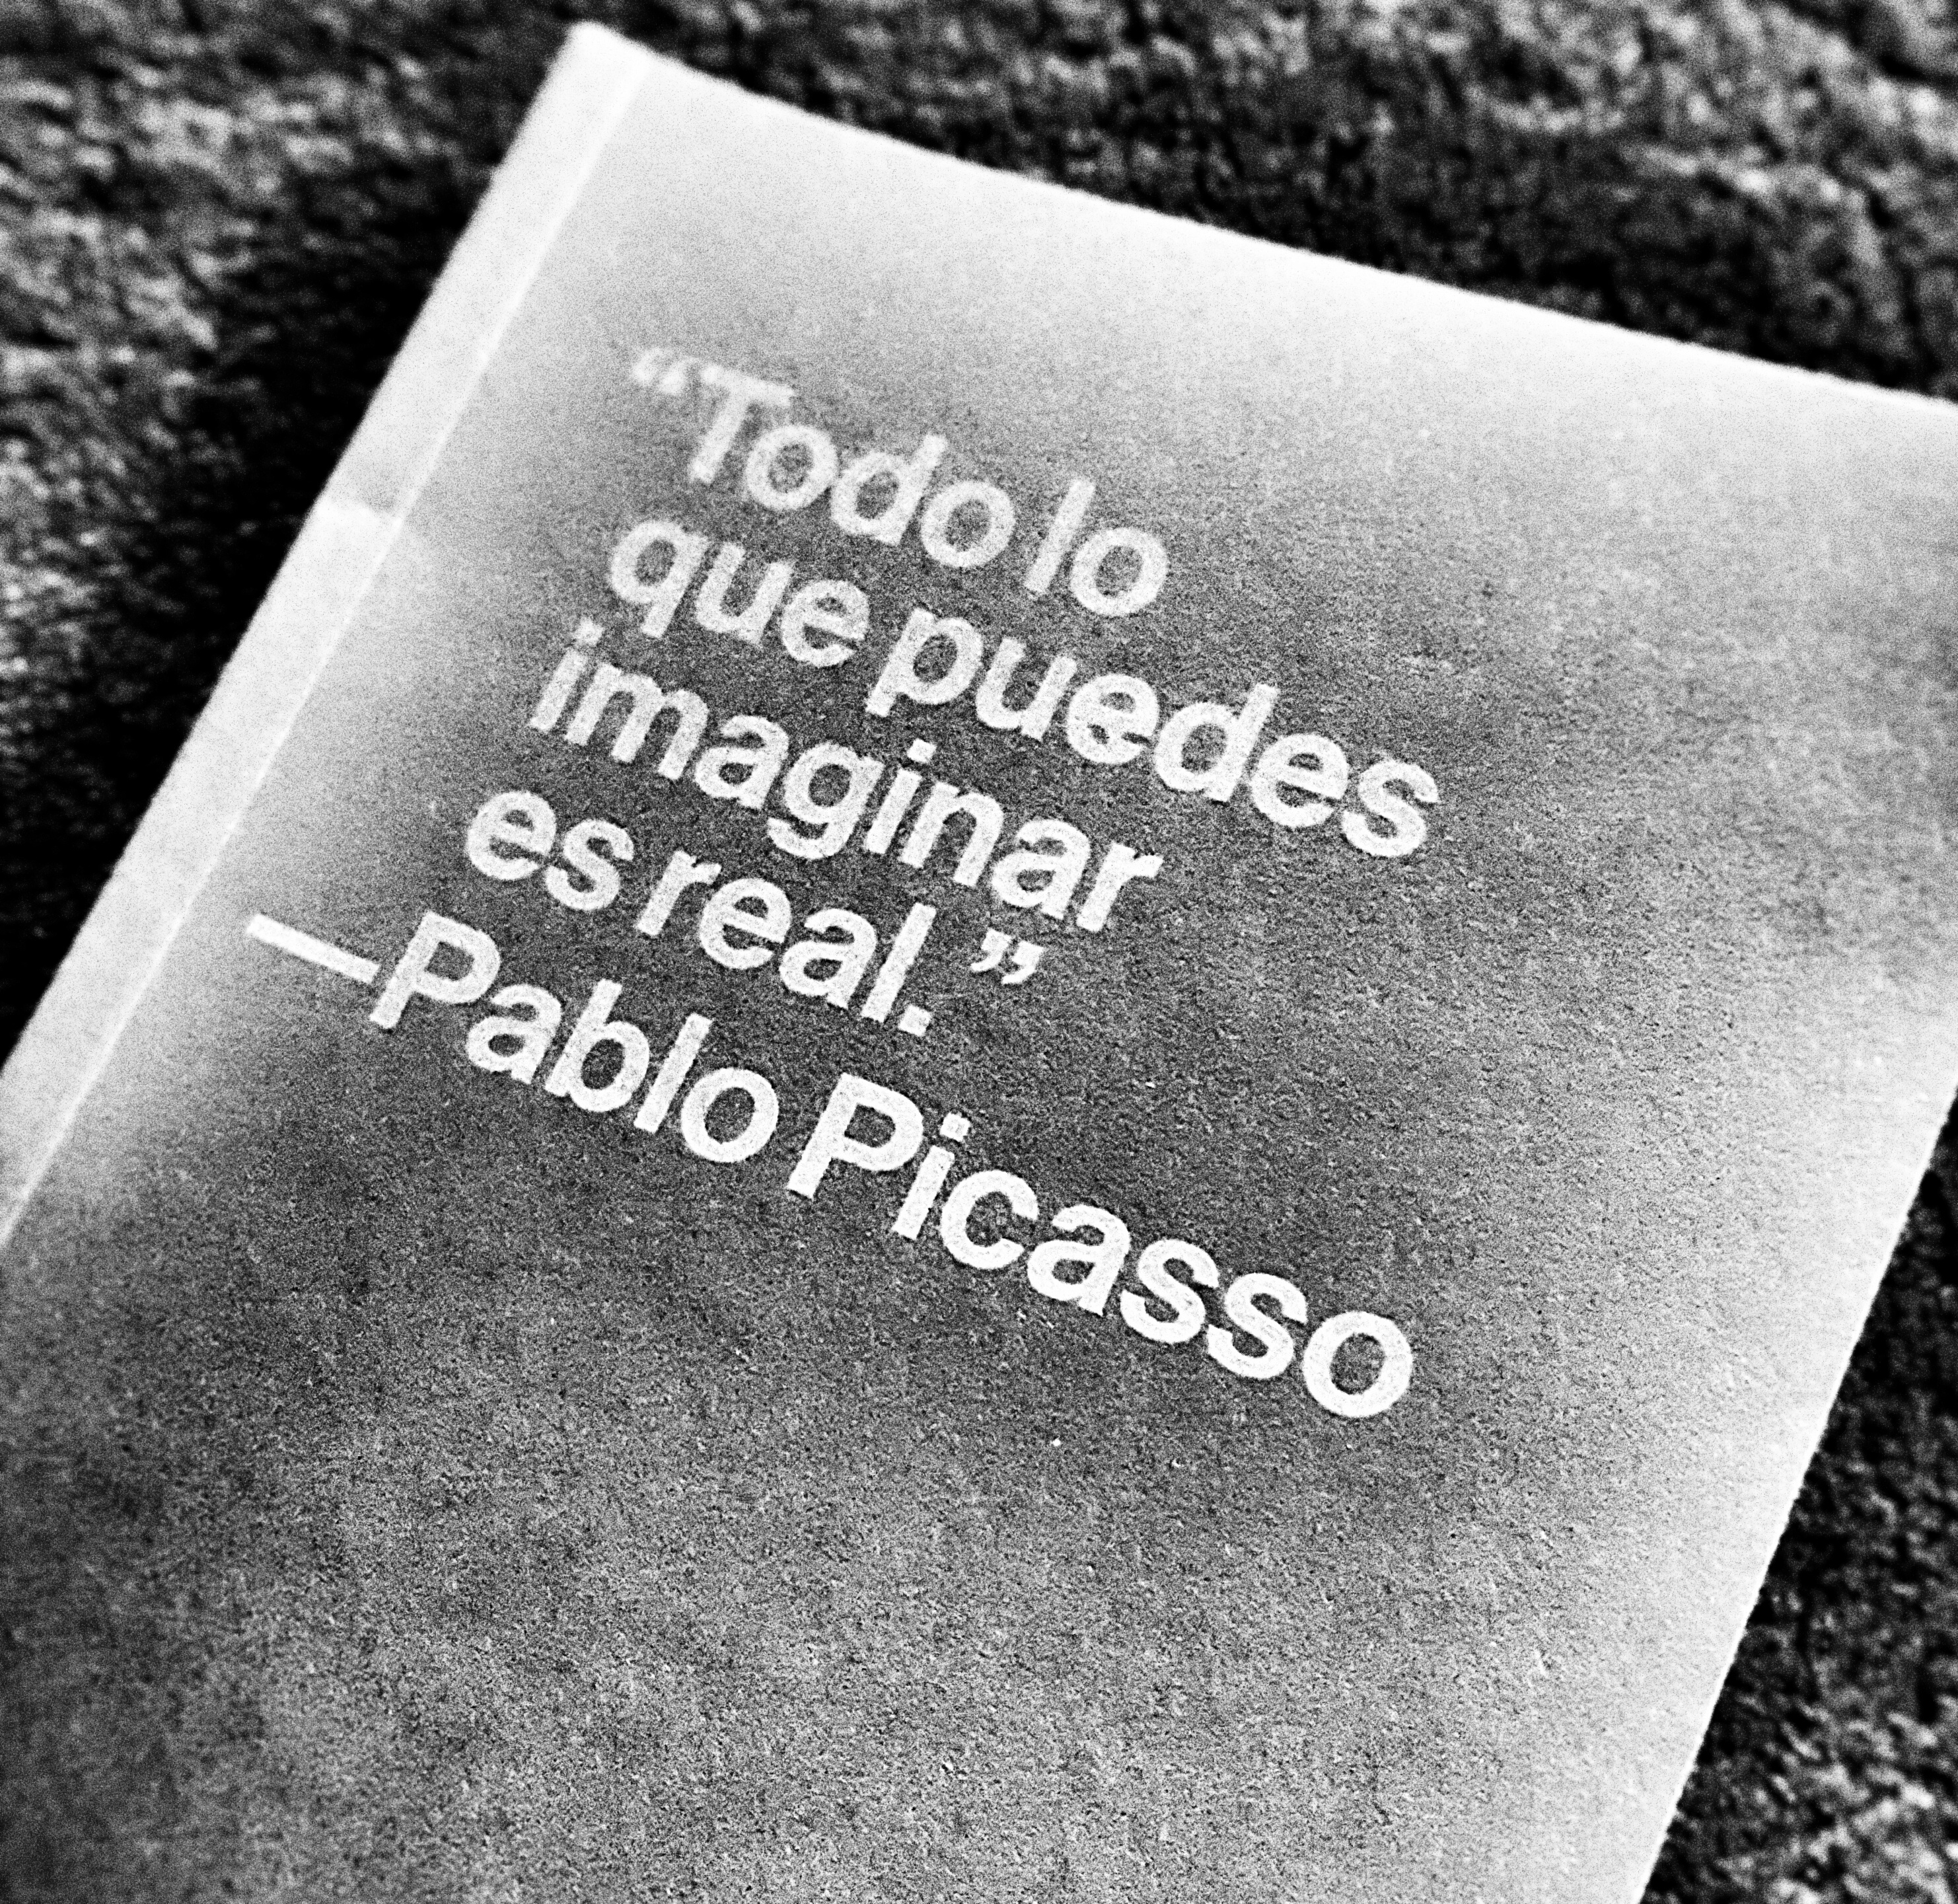 notebook with quote from Picasso in Spanish that translates as "All that you can imagine is real"